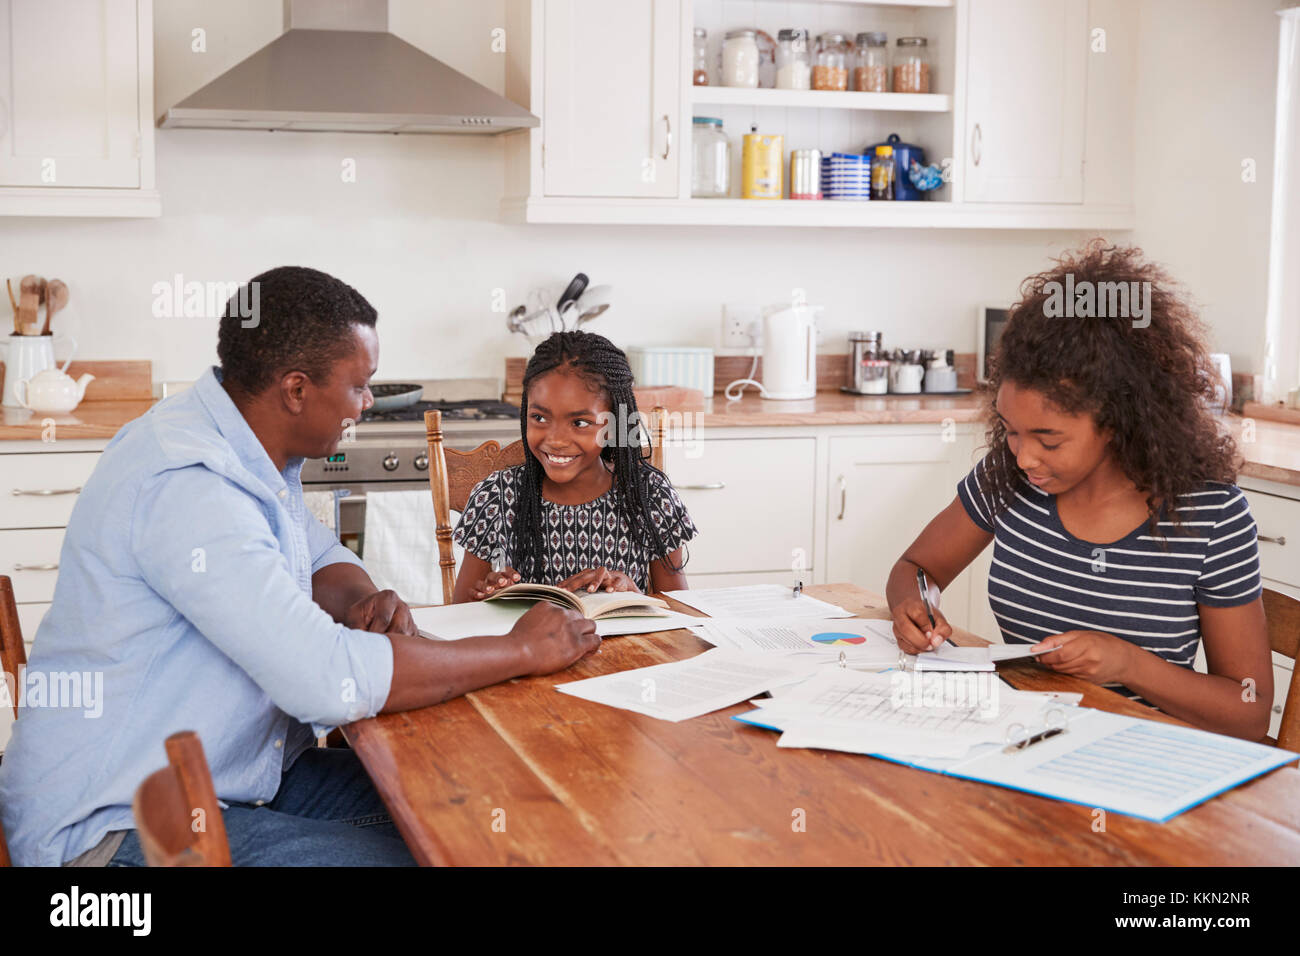 Father Helping Two Daughters Sitting At Table Doing Homework Stock Photo